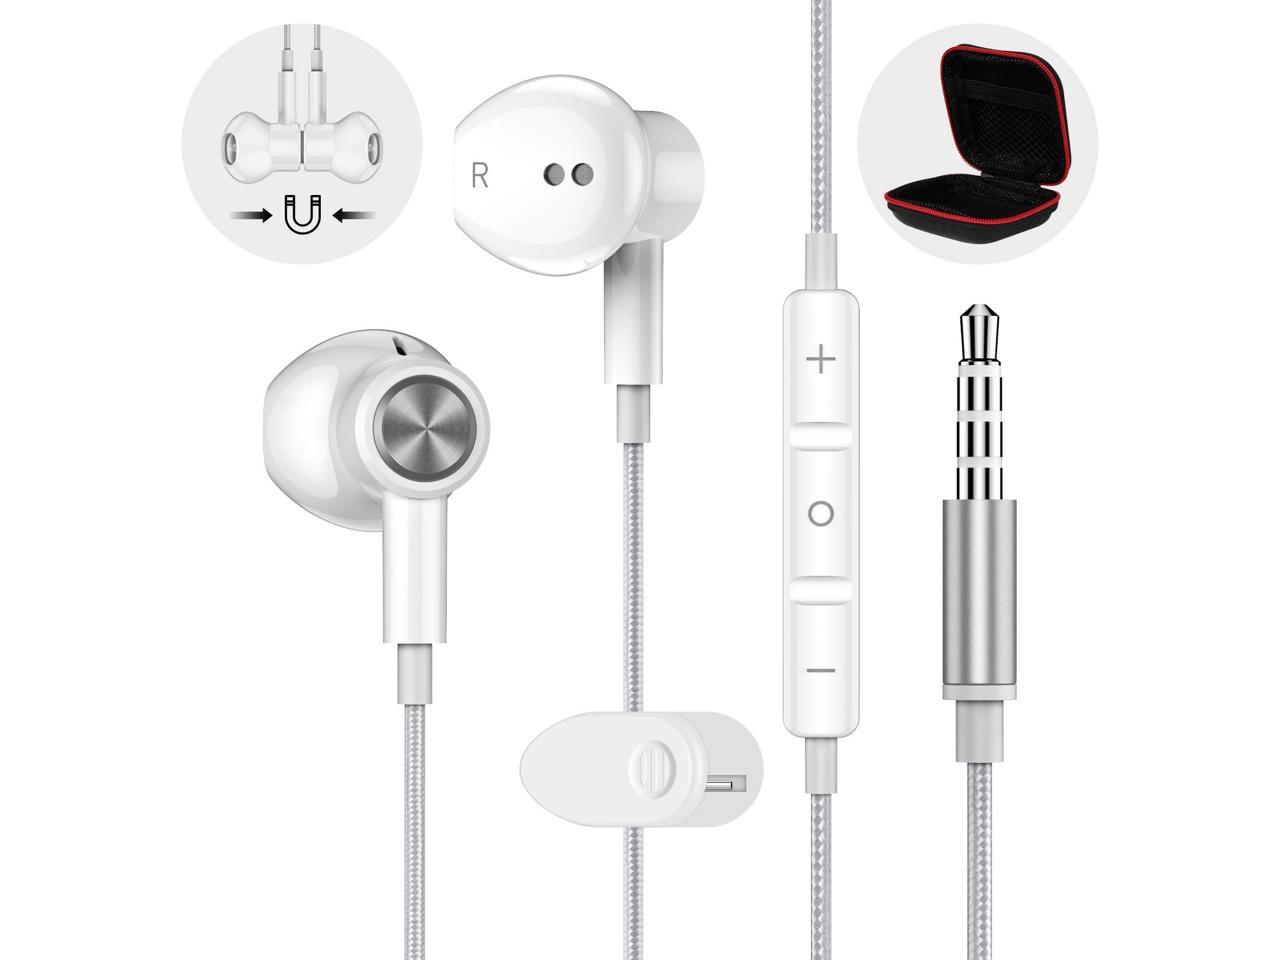 APETOO Wired Headphones for iPhone 6s Plus 5S SE 2016, 3.5mm Earbuds